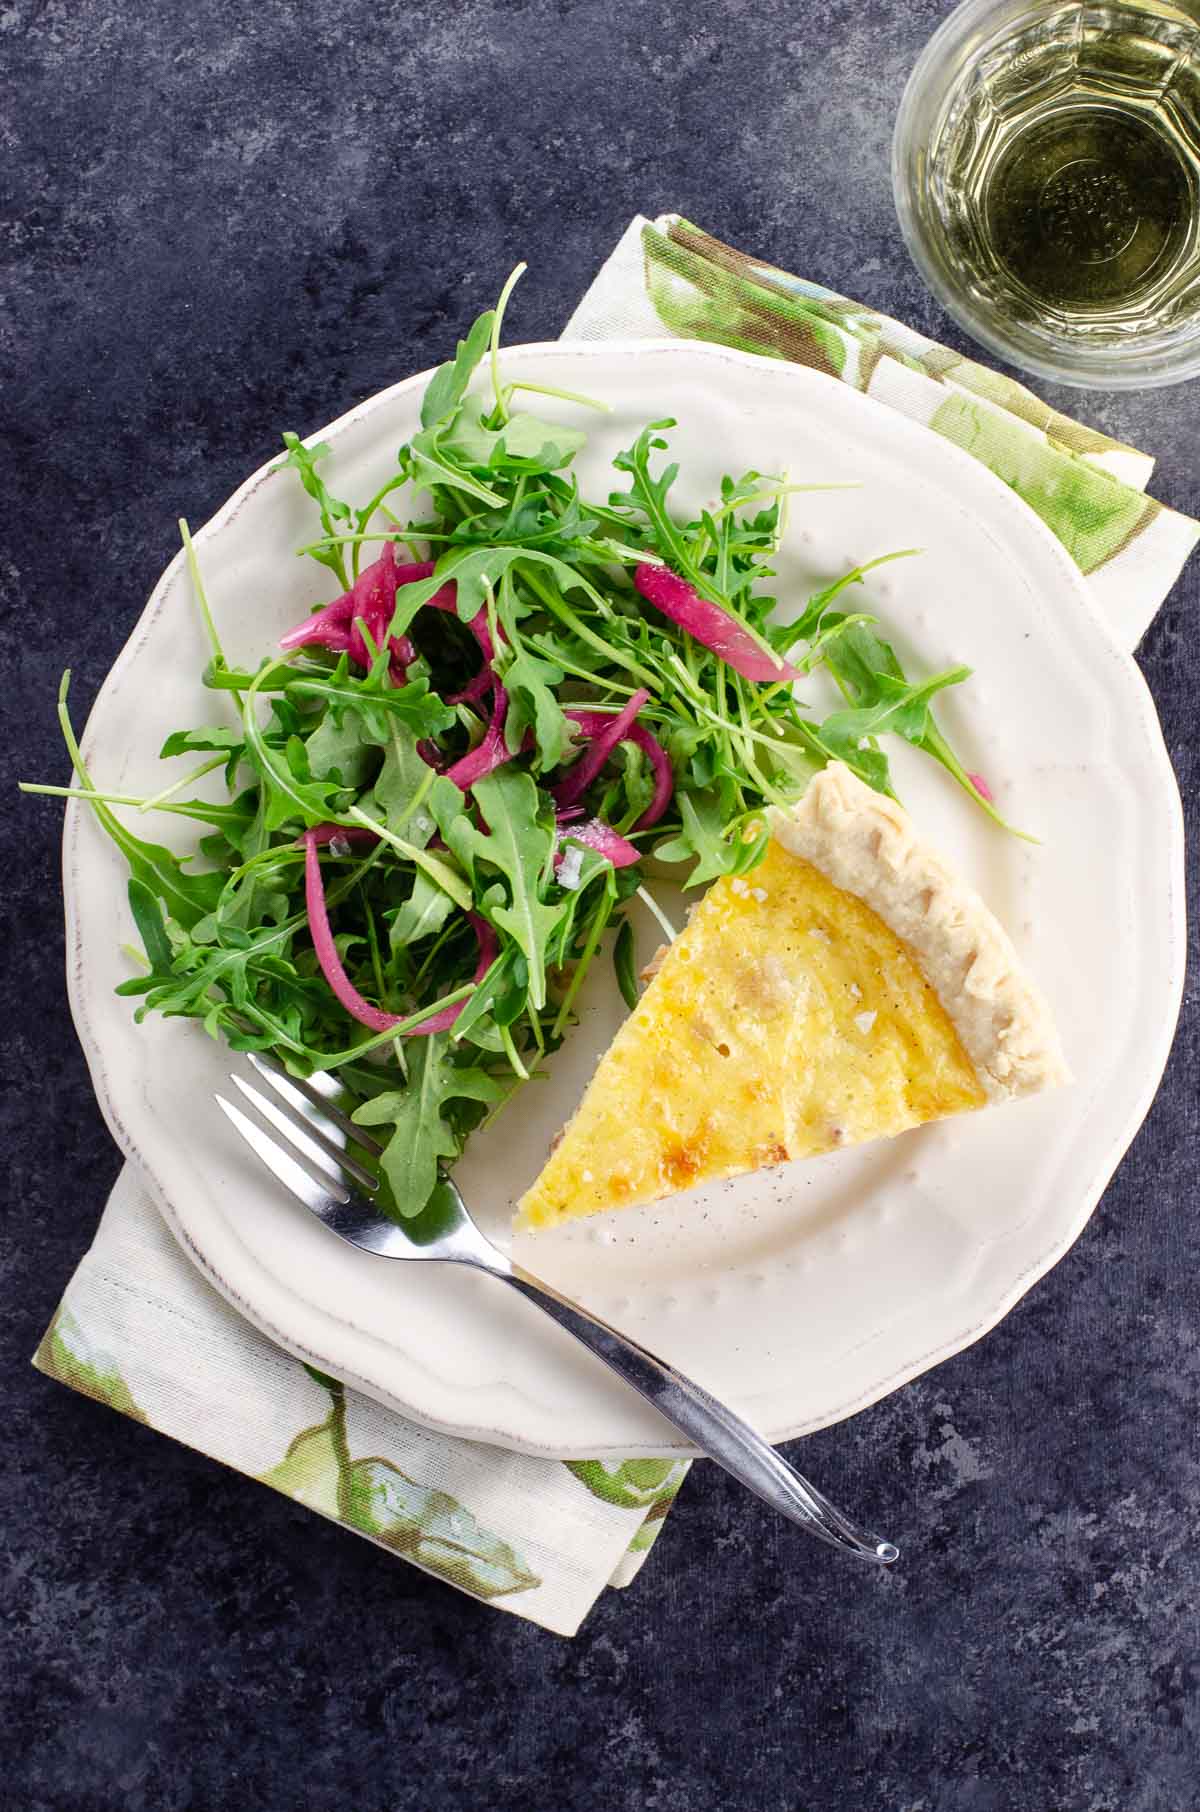 a slice of French Quiche Lorraine and salad on a plate, and a glass of white wine